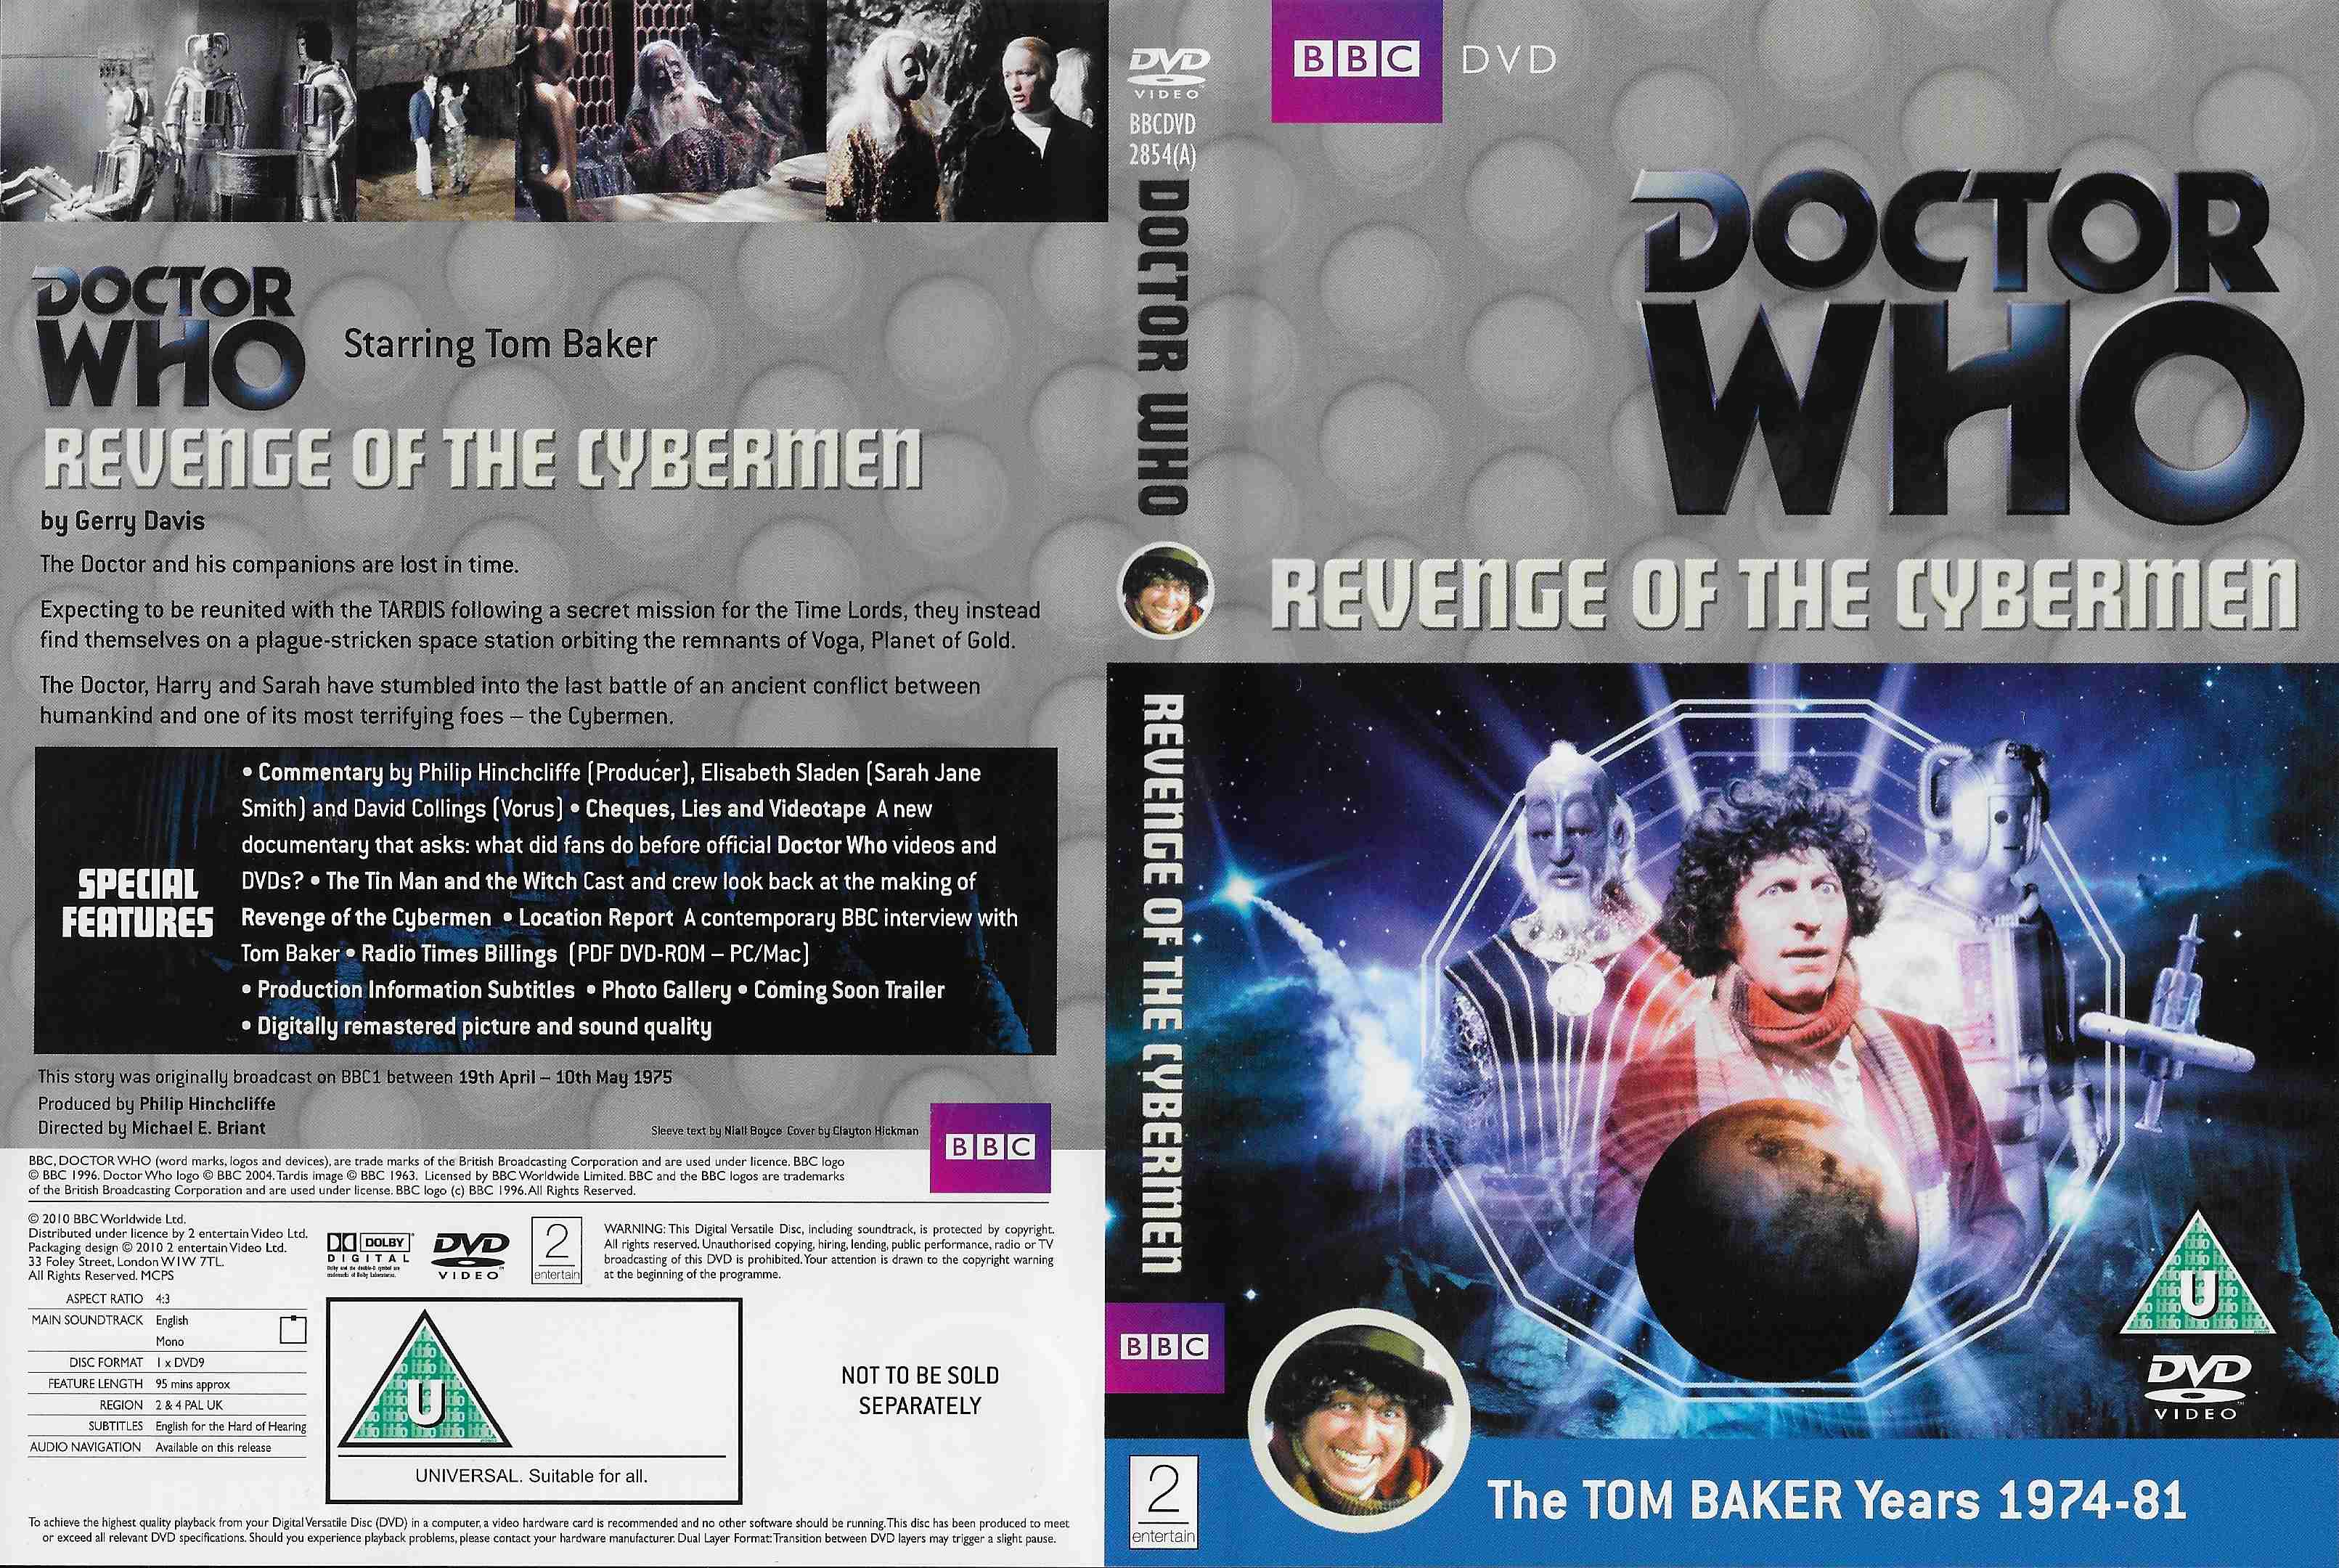 Picture of BBCDVD 2854A Doctor Who - Revenge of the Cybermen by artist Gerry Davis from the BBC records and Tapes library